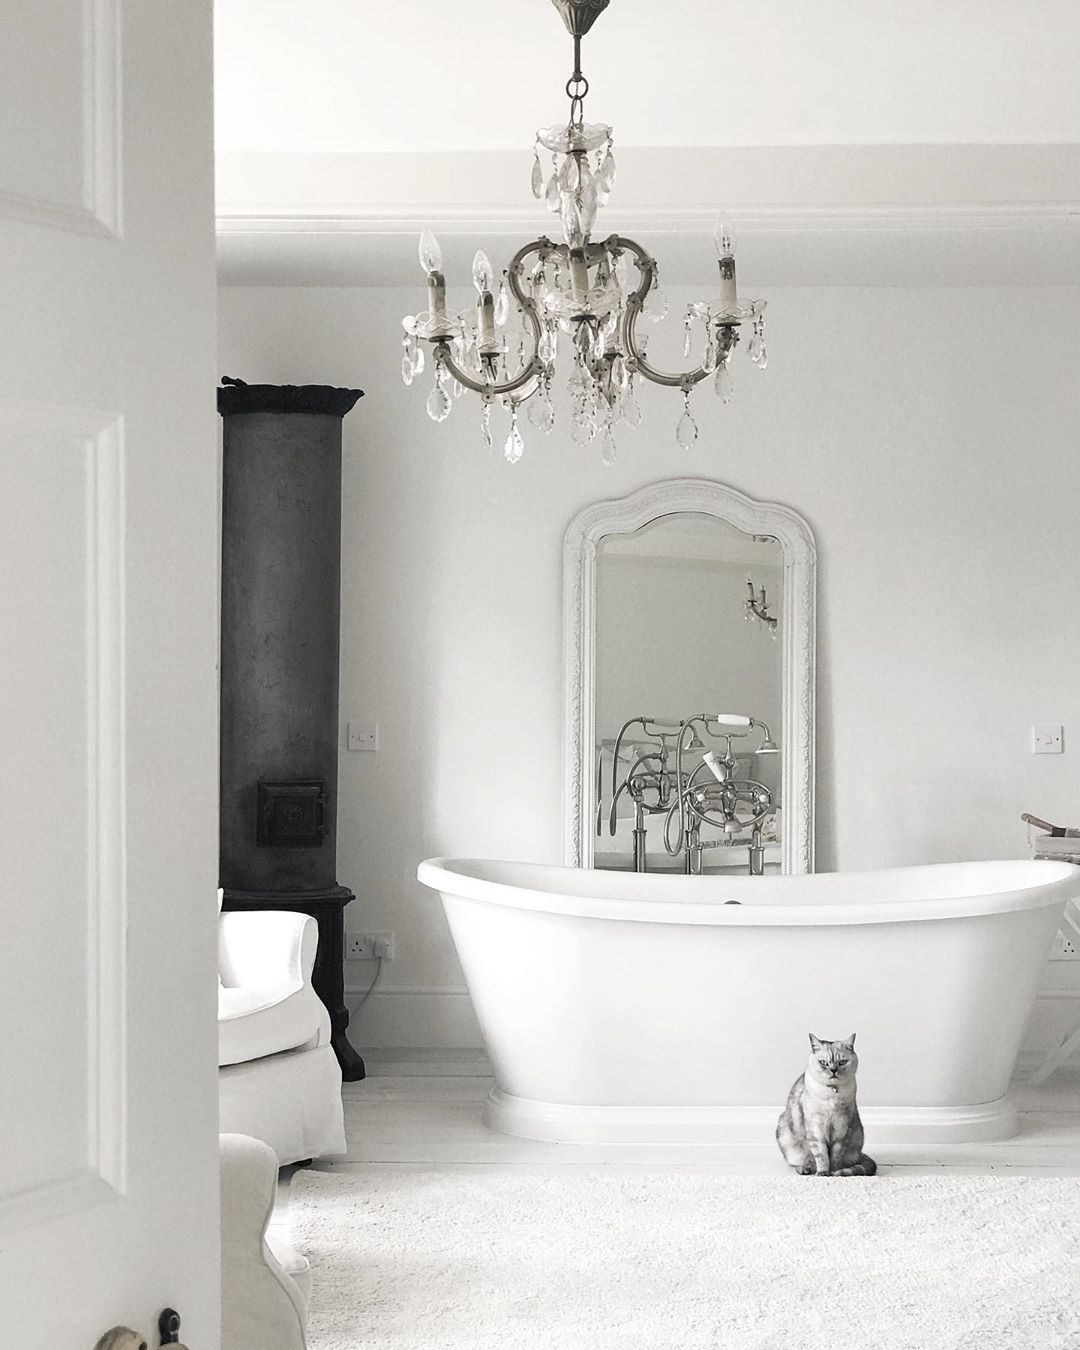 French Country Bathroom with White Tub and Crystal Chandelier via @white_and_faded